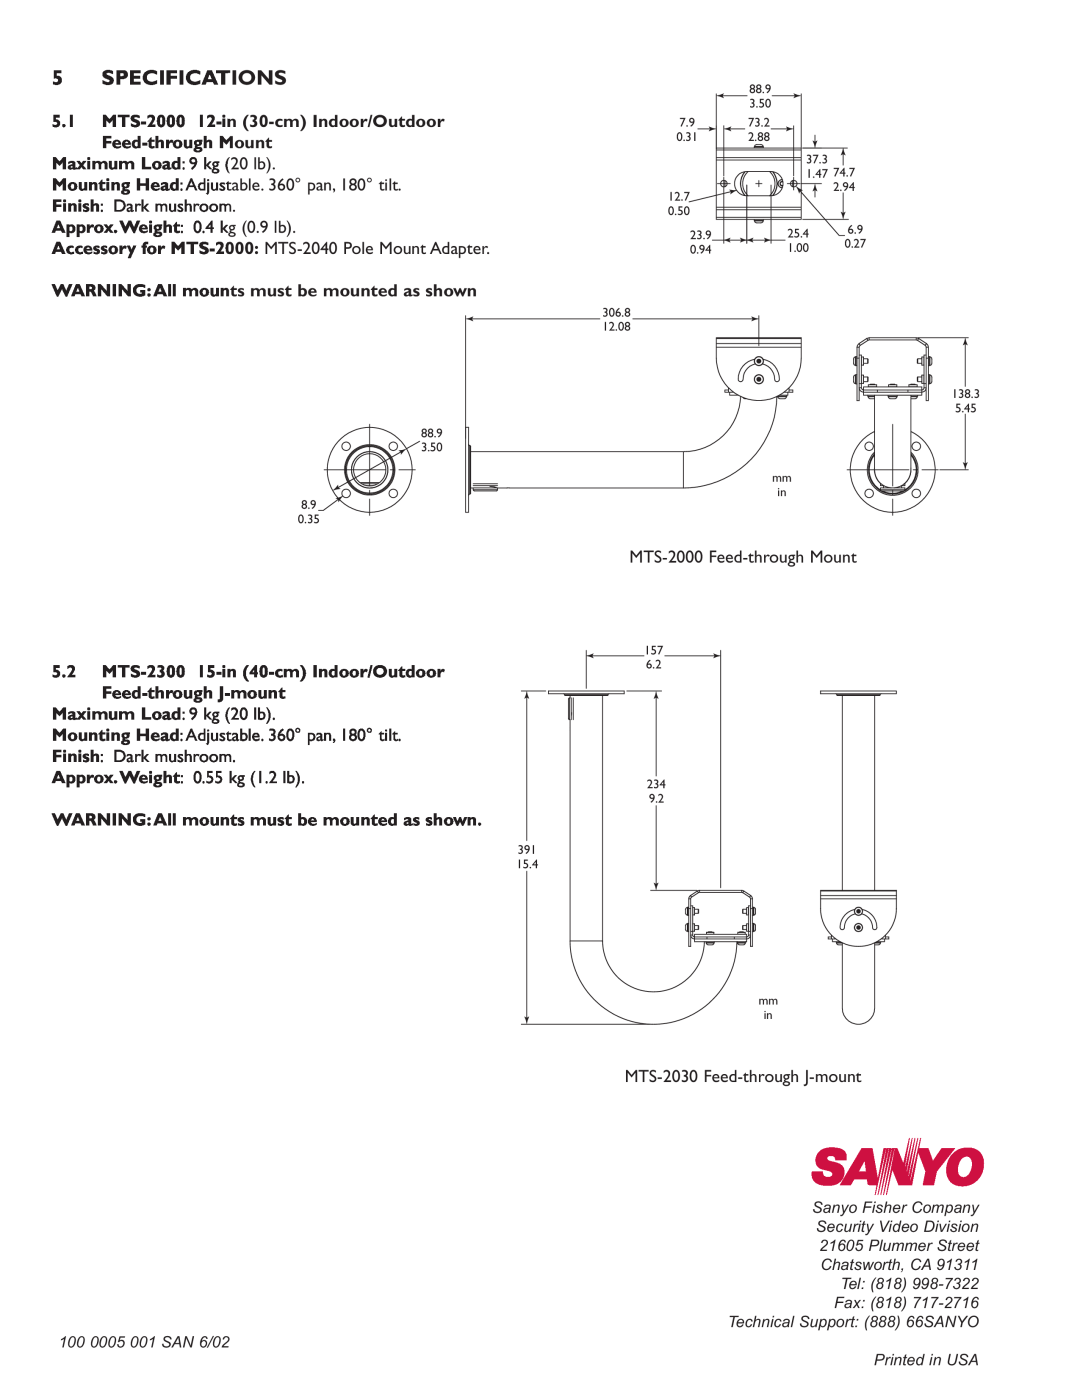 Sanyo MTS-2030 Specifications, WARNING All mounts must be mounted as shown, 5.2MTS-2300 15-in 40-cmIndoor/Outdoor 